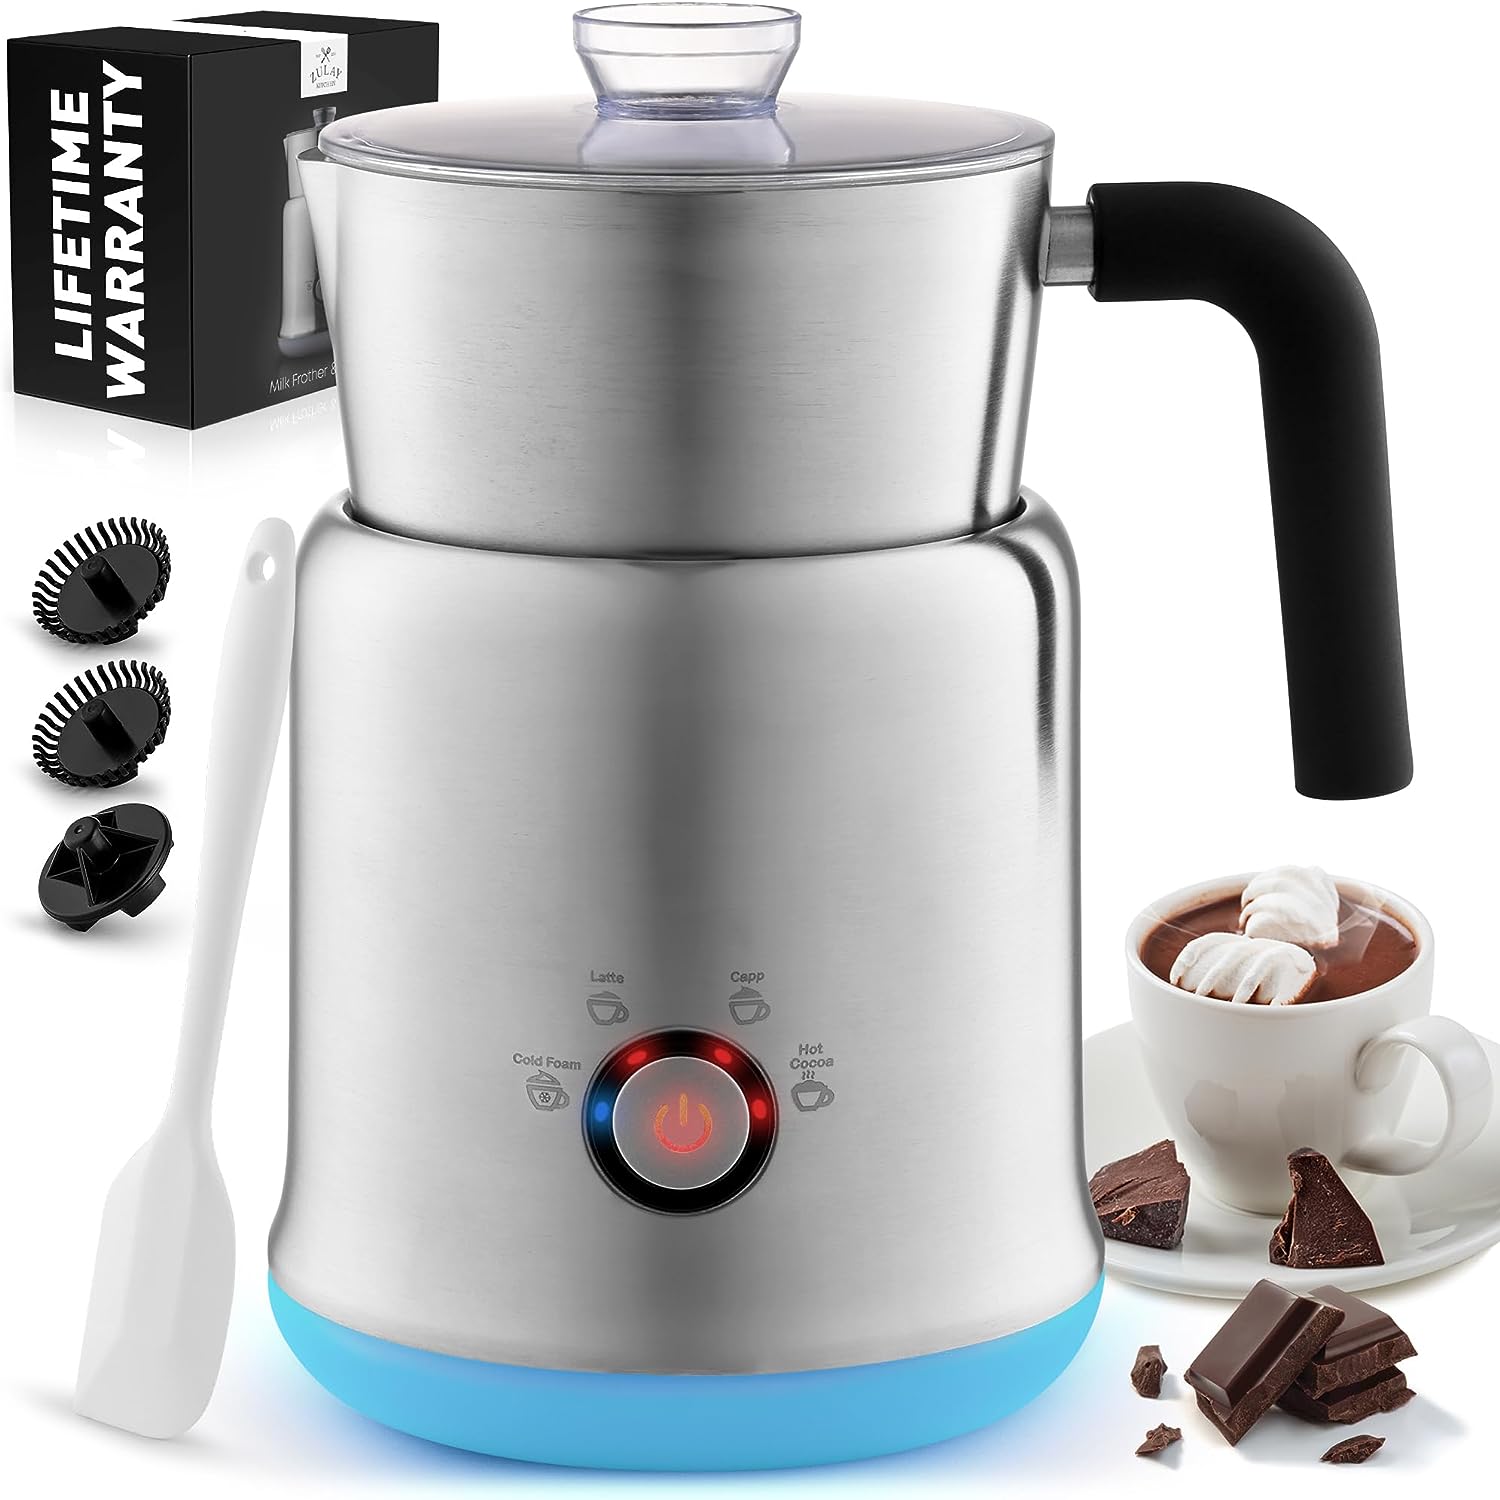 Healifty Boiler Pot Melting Chocolate 1 Set Double Boiler Stainless Steel  Melting Pot for Melting Chocolate Candy Candle Soap and Wax 600ml Double